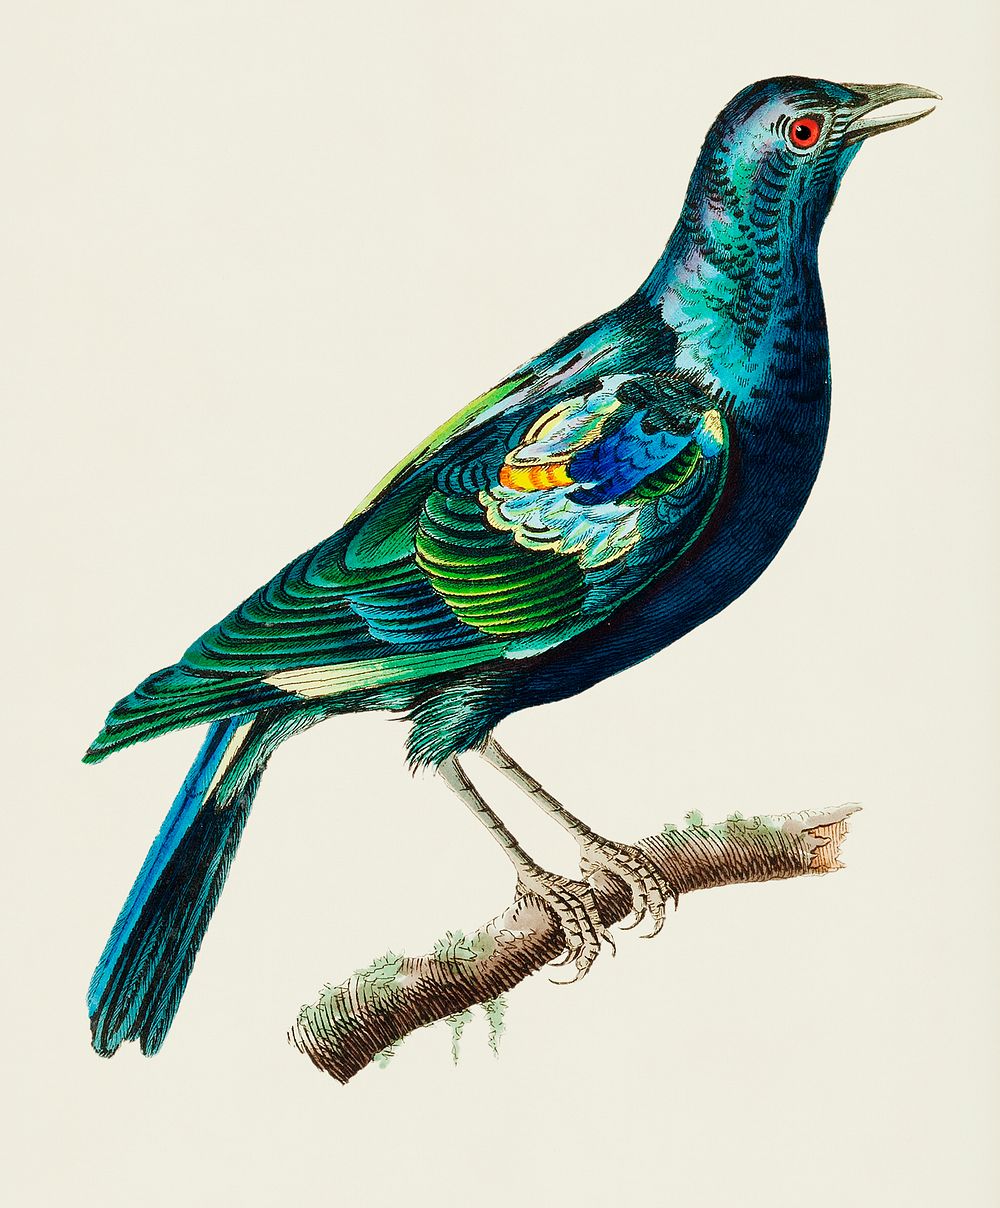 Shining Stare or Green Stare illustration from The Naturalist's Miscellany (1789-1813) by George Shaw (1751-1813)